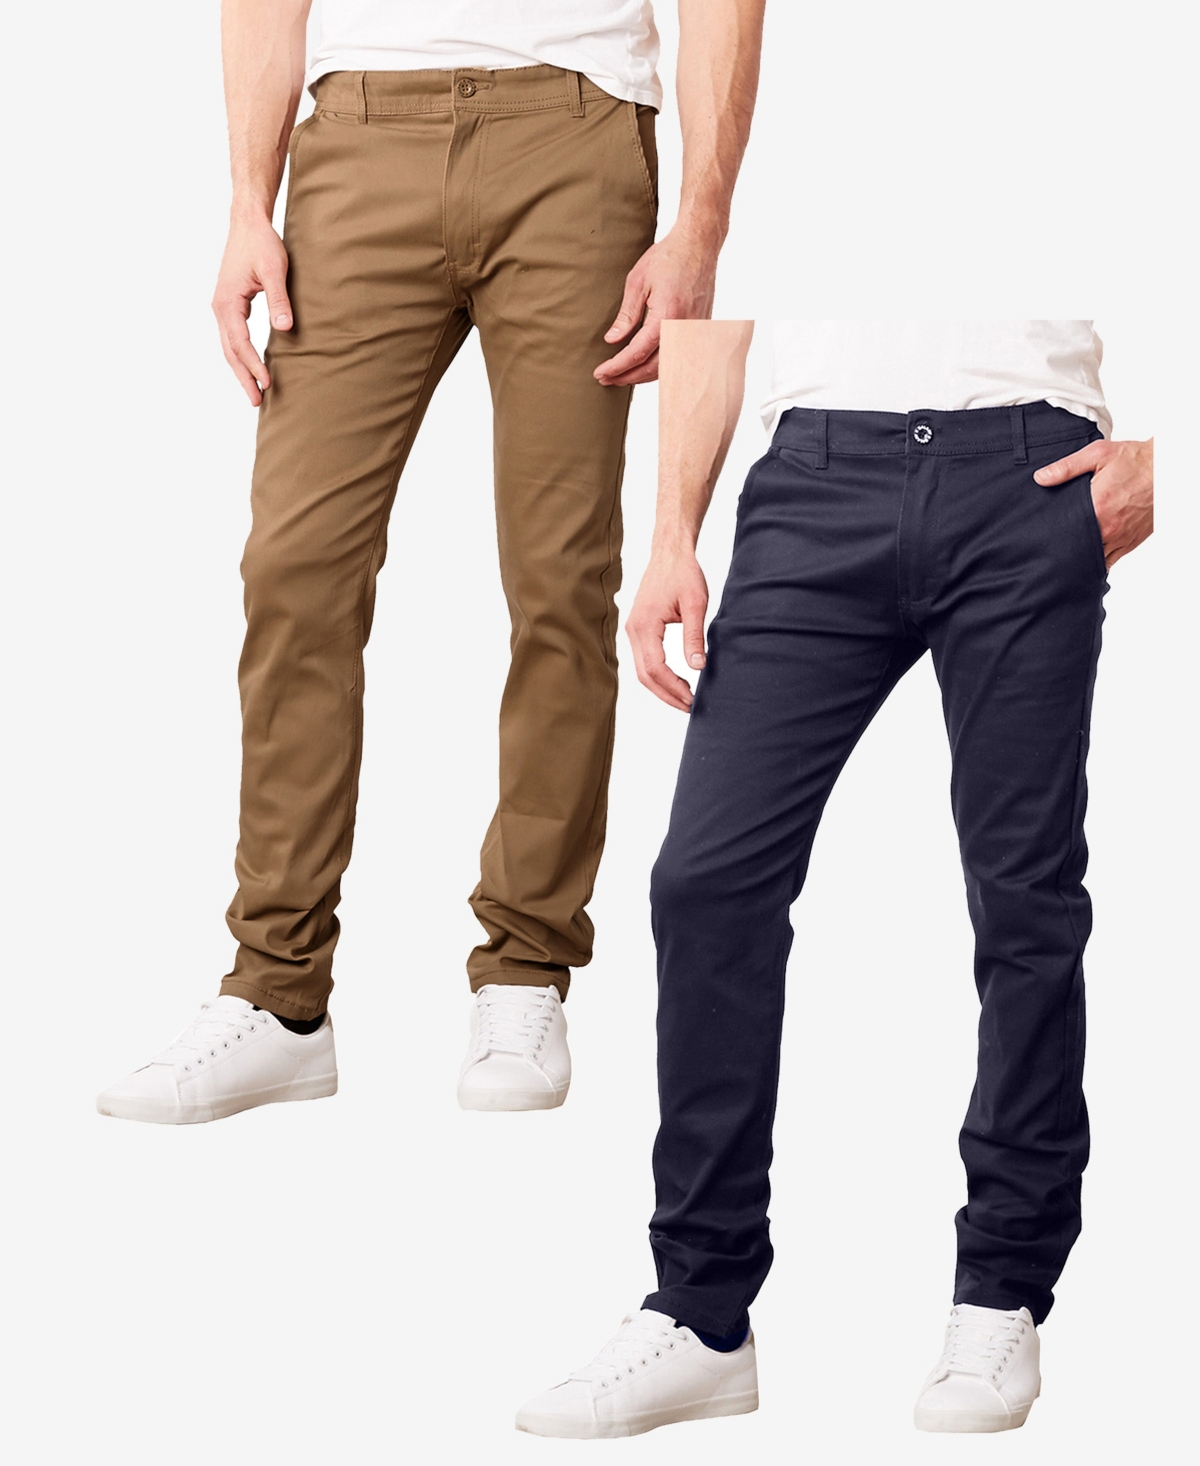 Galaxy By Harvic Men's Super Stretch Slim Fit Everyday Chino Pants, Pack Of 2 In Dark Khaki Navy